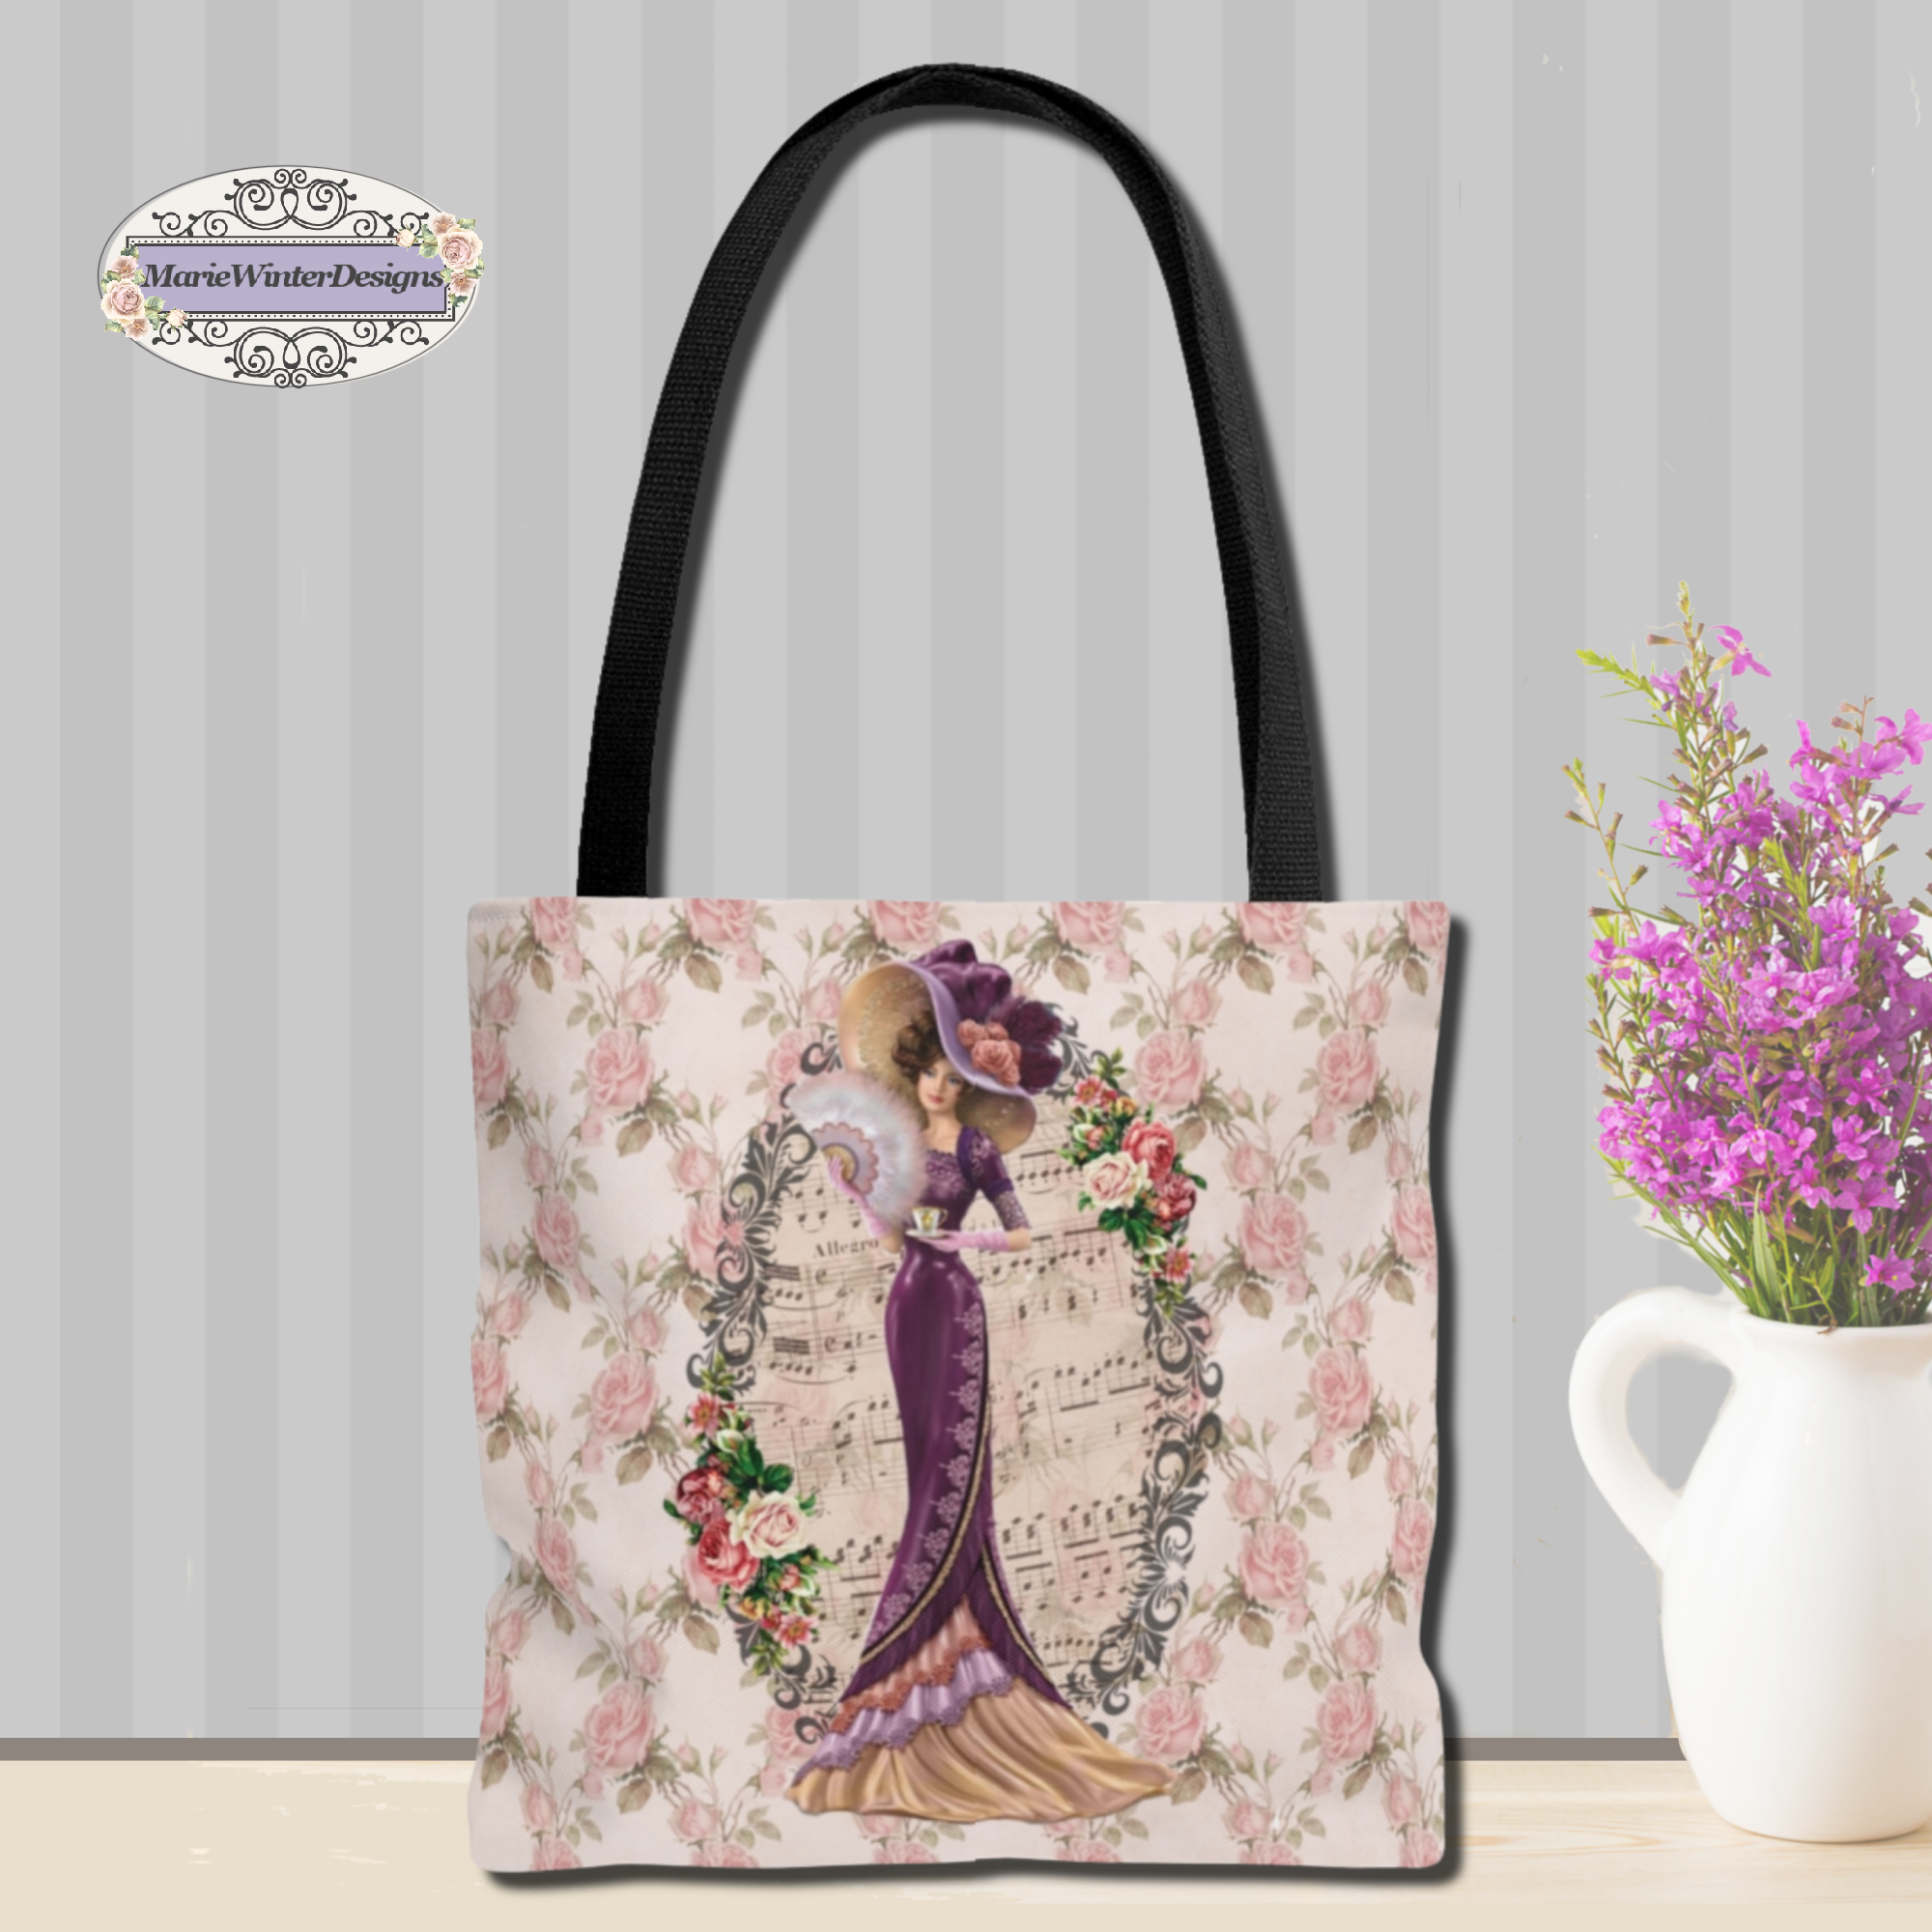 Tote Bag Purse Book Bag With Elegant Early 1900s Vintage Hello Dolly Lady in a Burgandy Dress on pink roses, green leaves white background against gray stripe backdrop with white vase ans small purple flowers